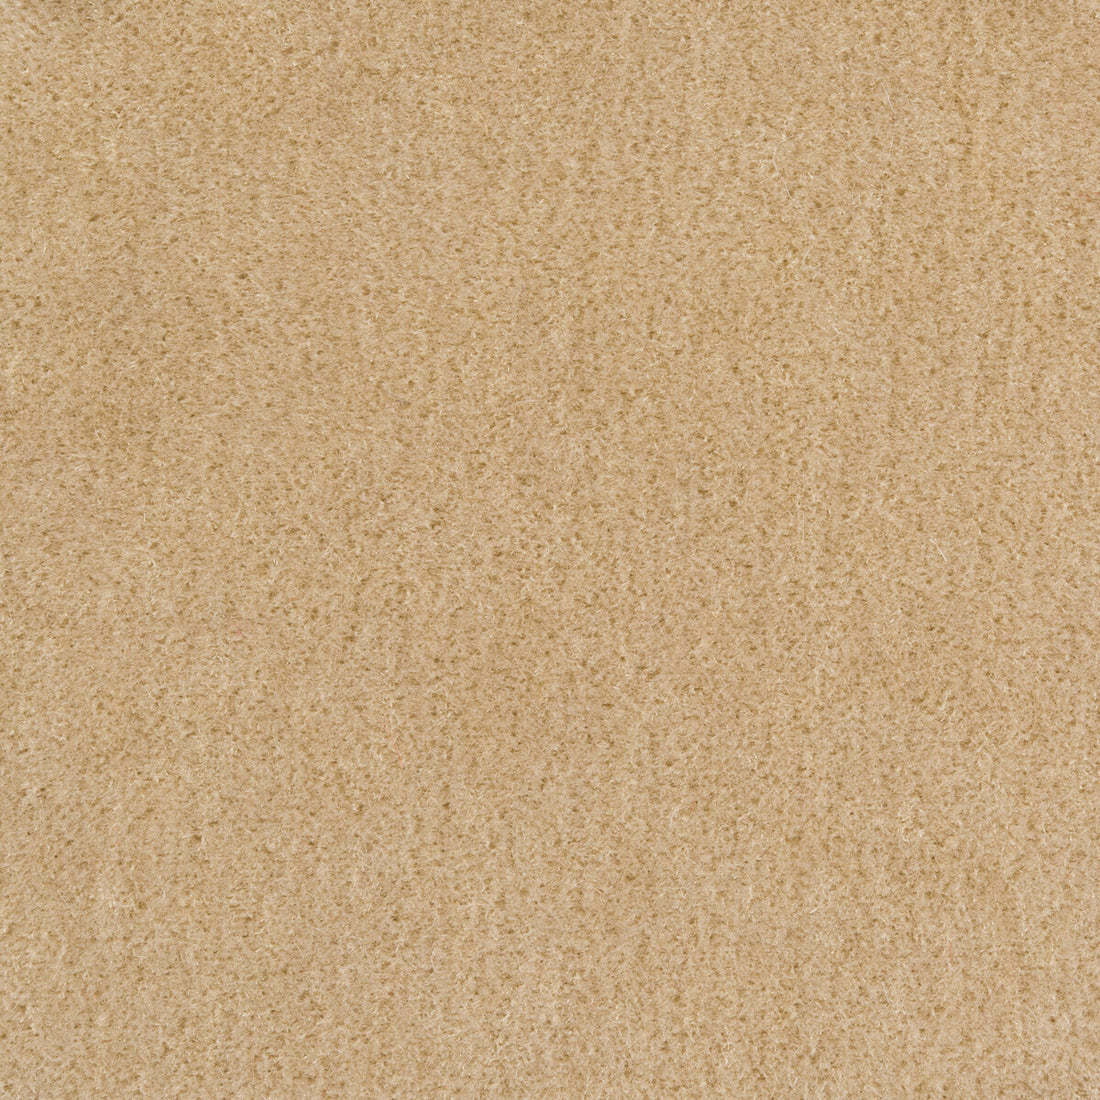 Windsor Mohair fabric in hush color - pattern 34258.1.0 - by Kravet Couture